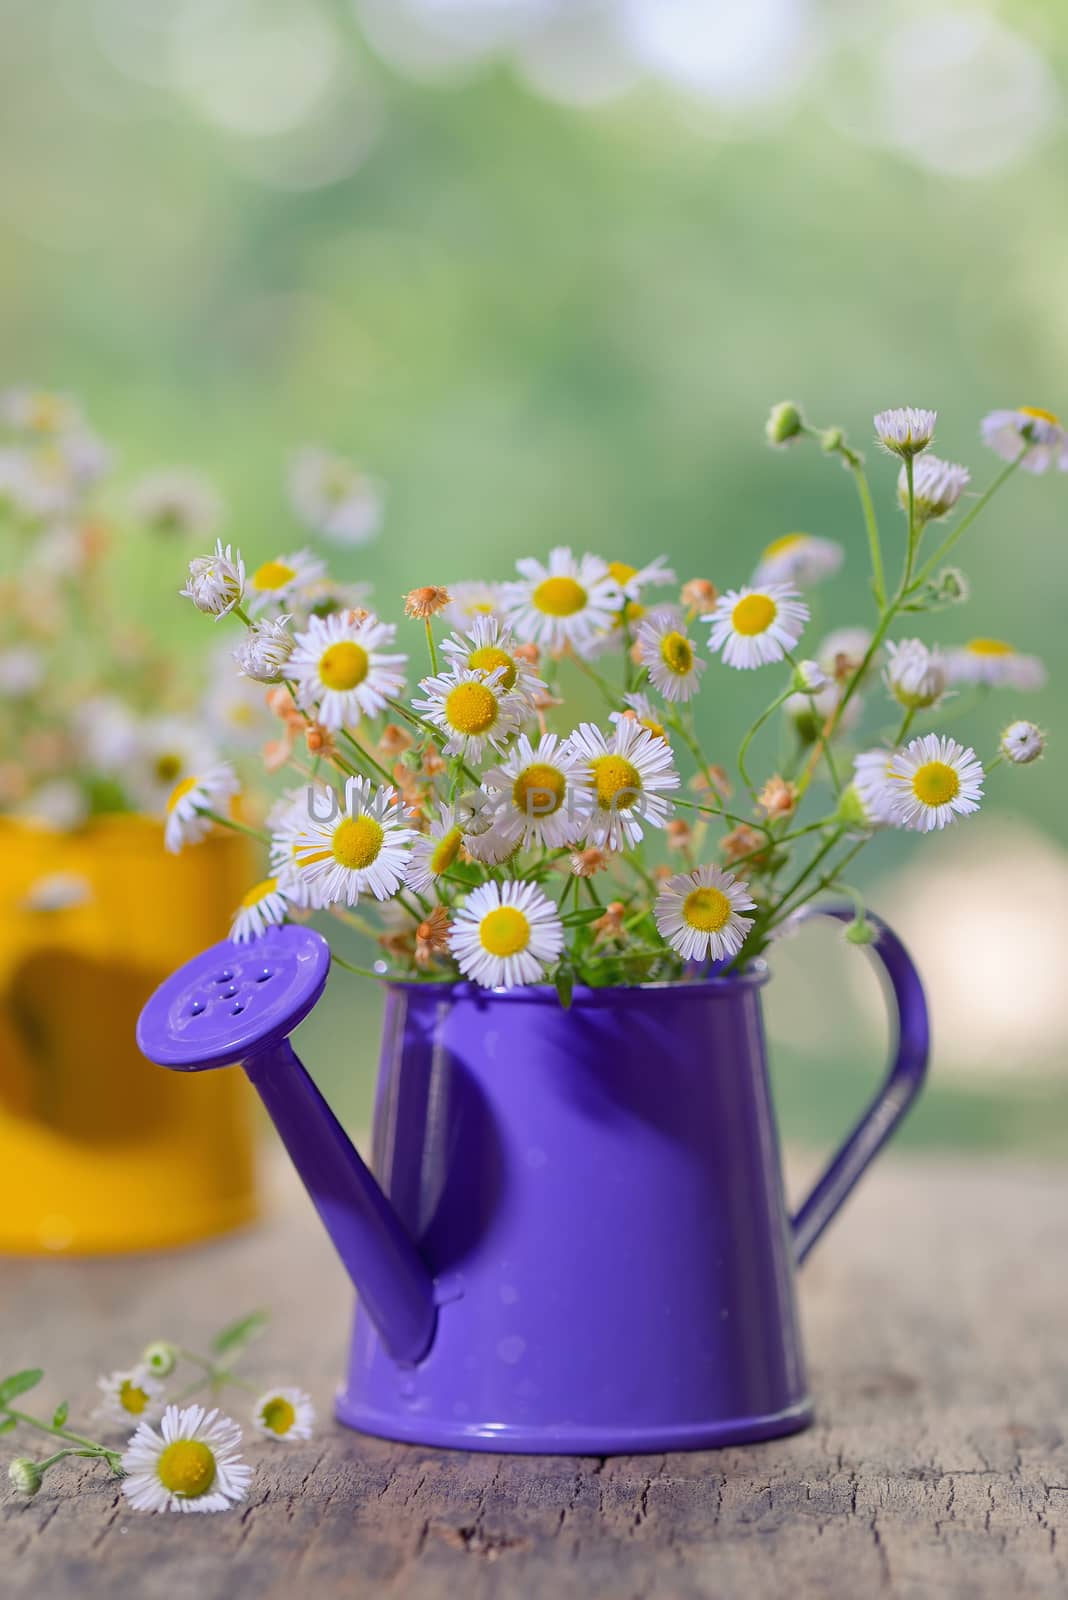 Marguerite Daisy Flowers by mady70